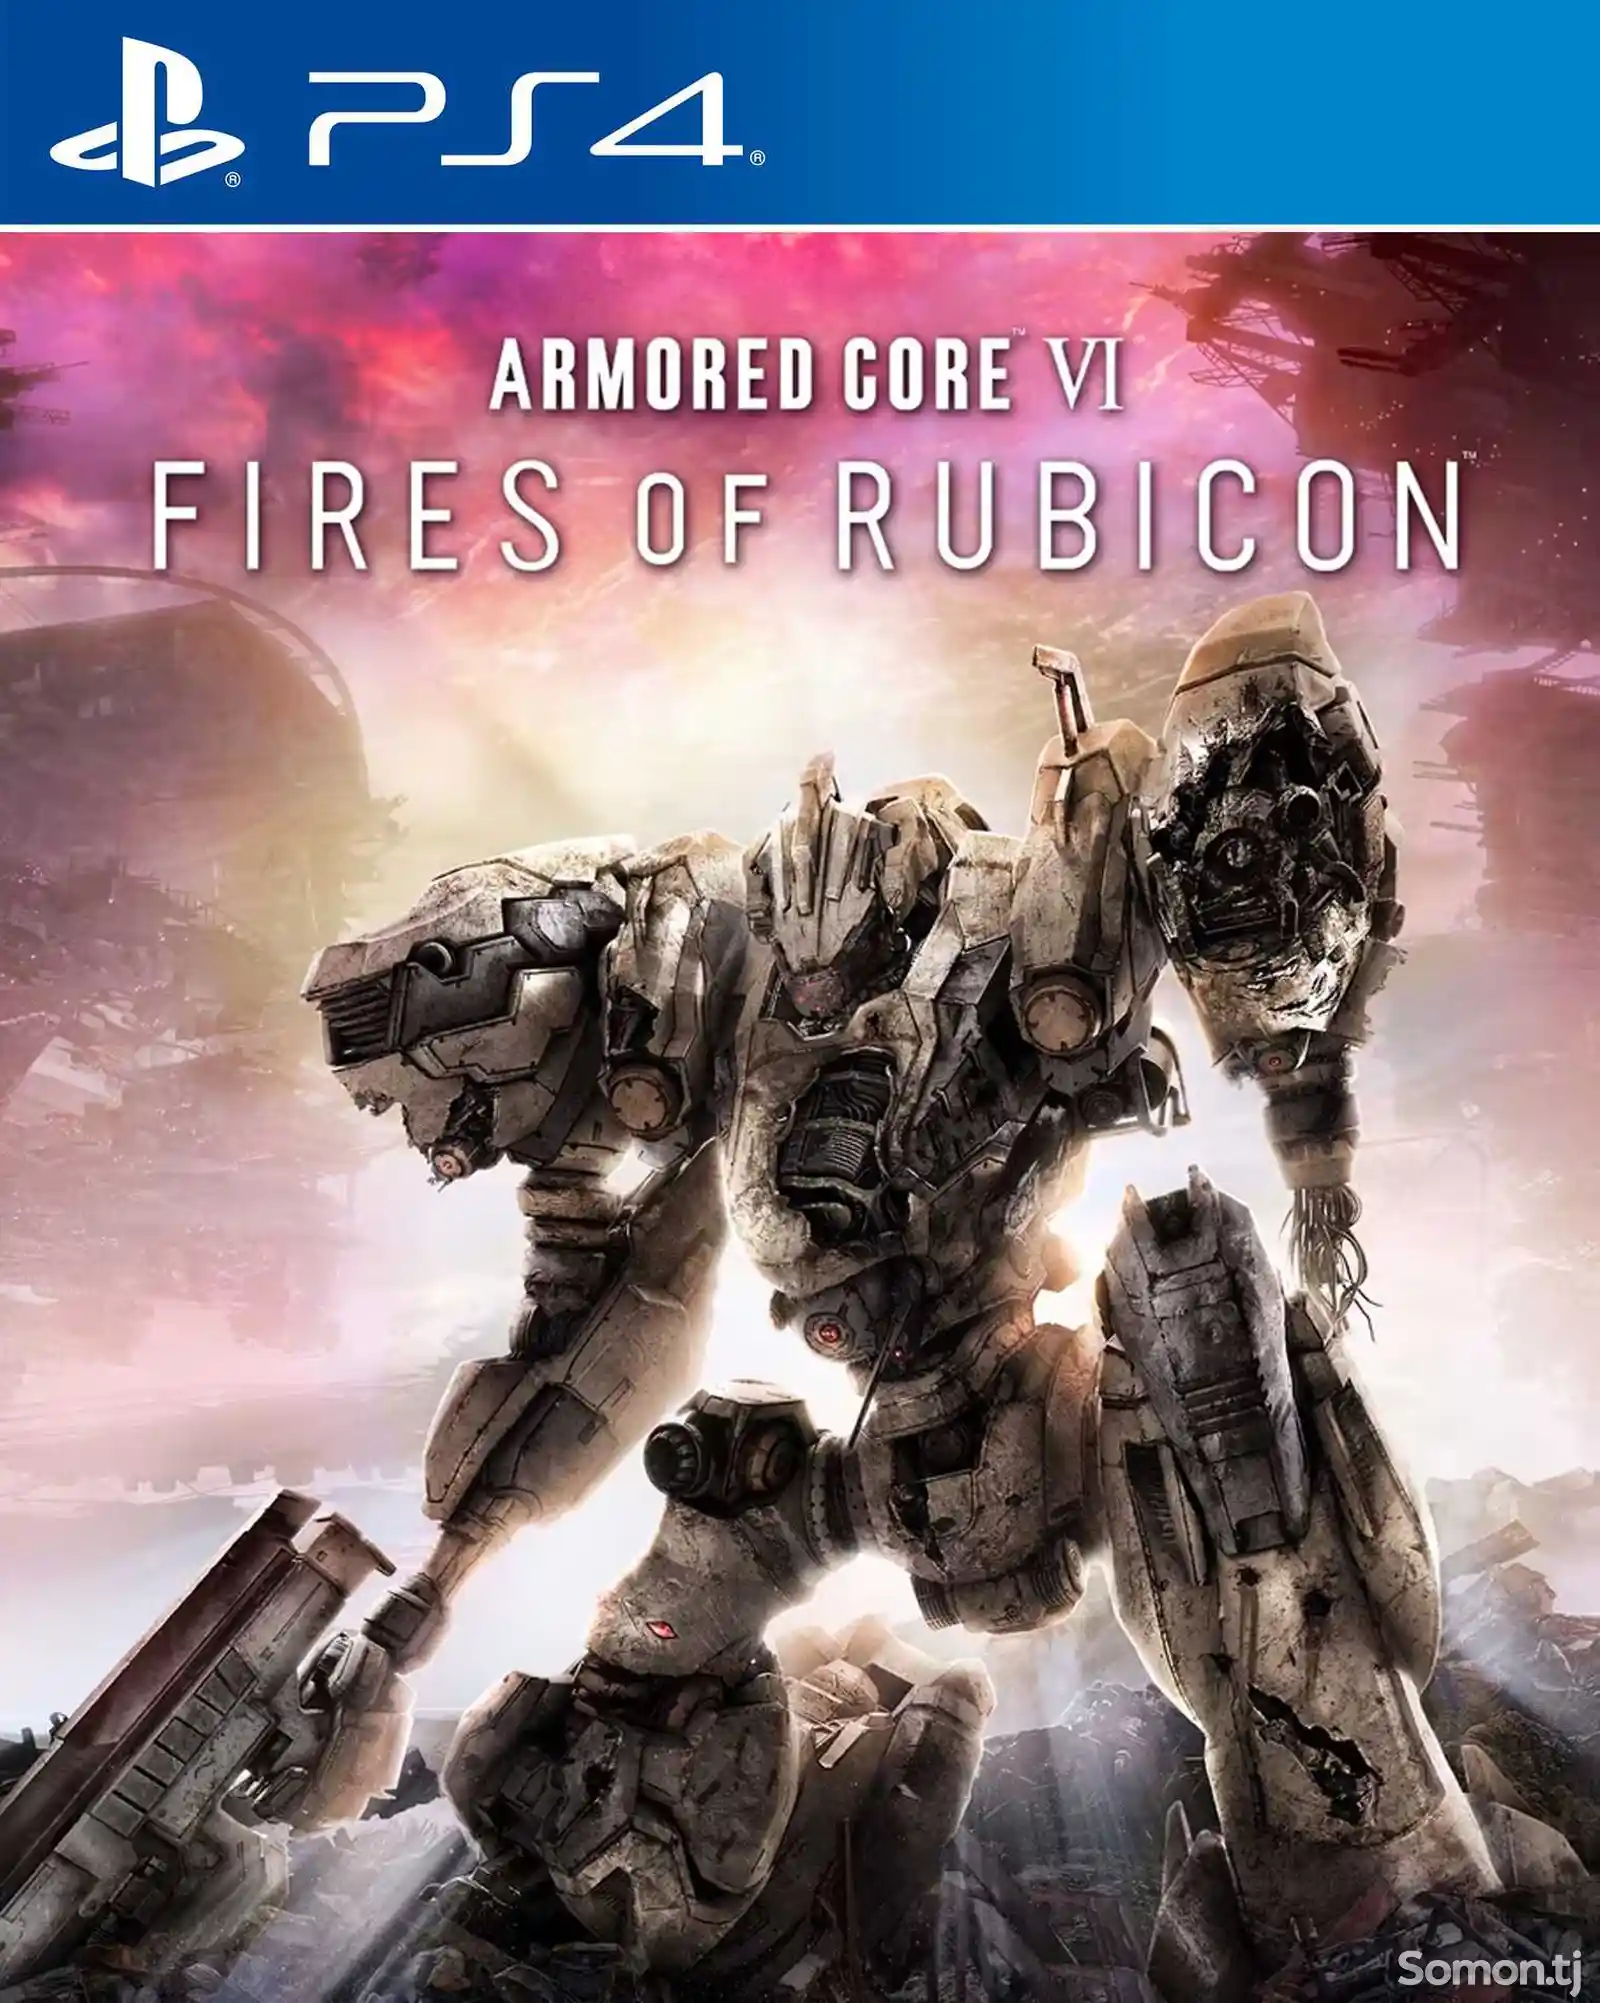 Игра Armored core 6 fires of rubicon для PS-4 / 5.05 / 6.72 / 7.02 / 9.00 /-1